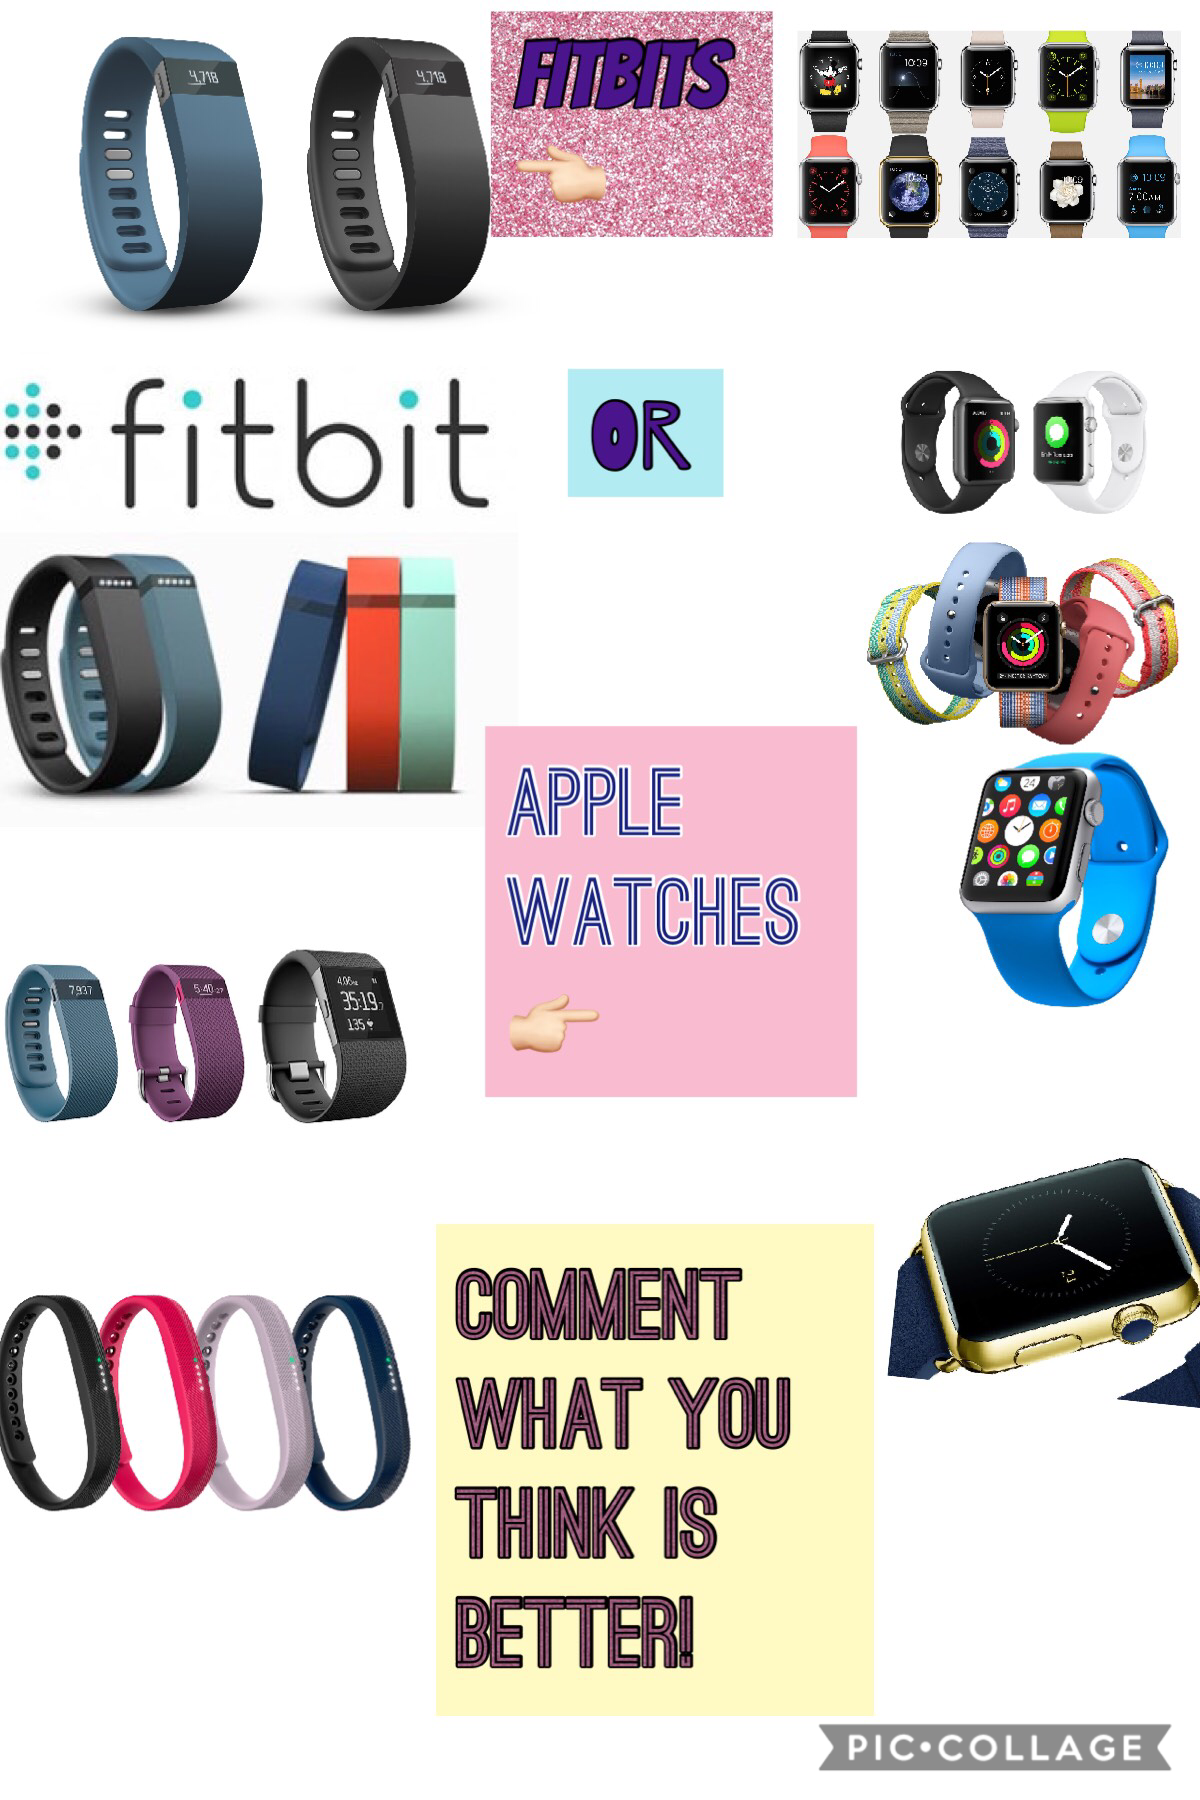 Comment which is better! Apple watches or fitbits? I have a fitbit but I don’t have an apple watch.